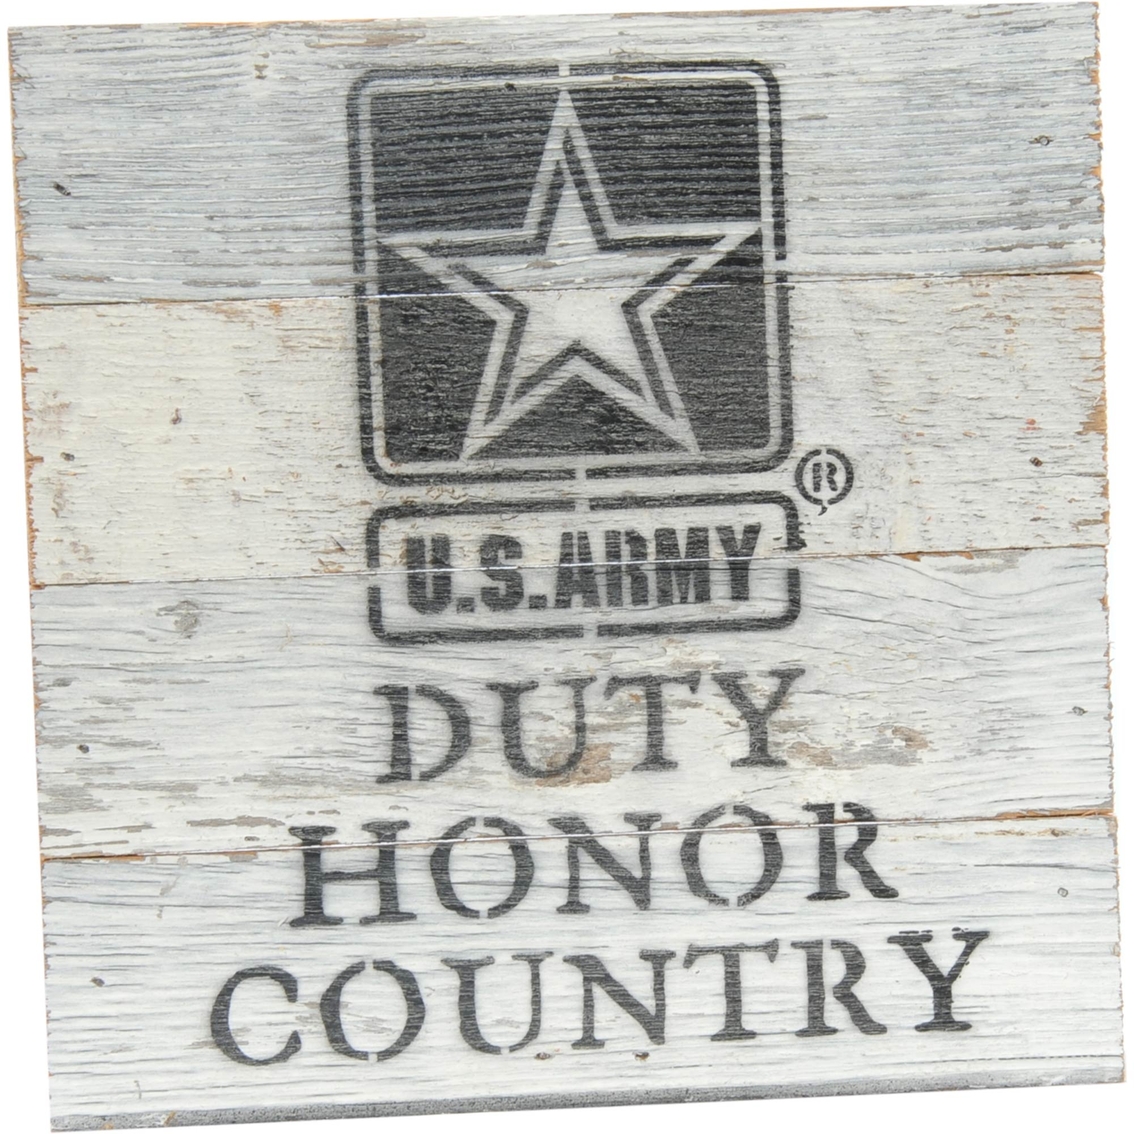 Uniformed Duty Honor Country 8 x 8 in. Reclaimed Wood Sign